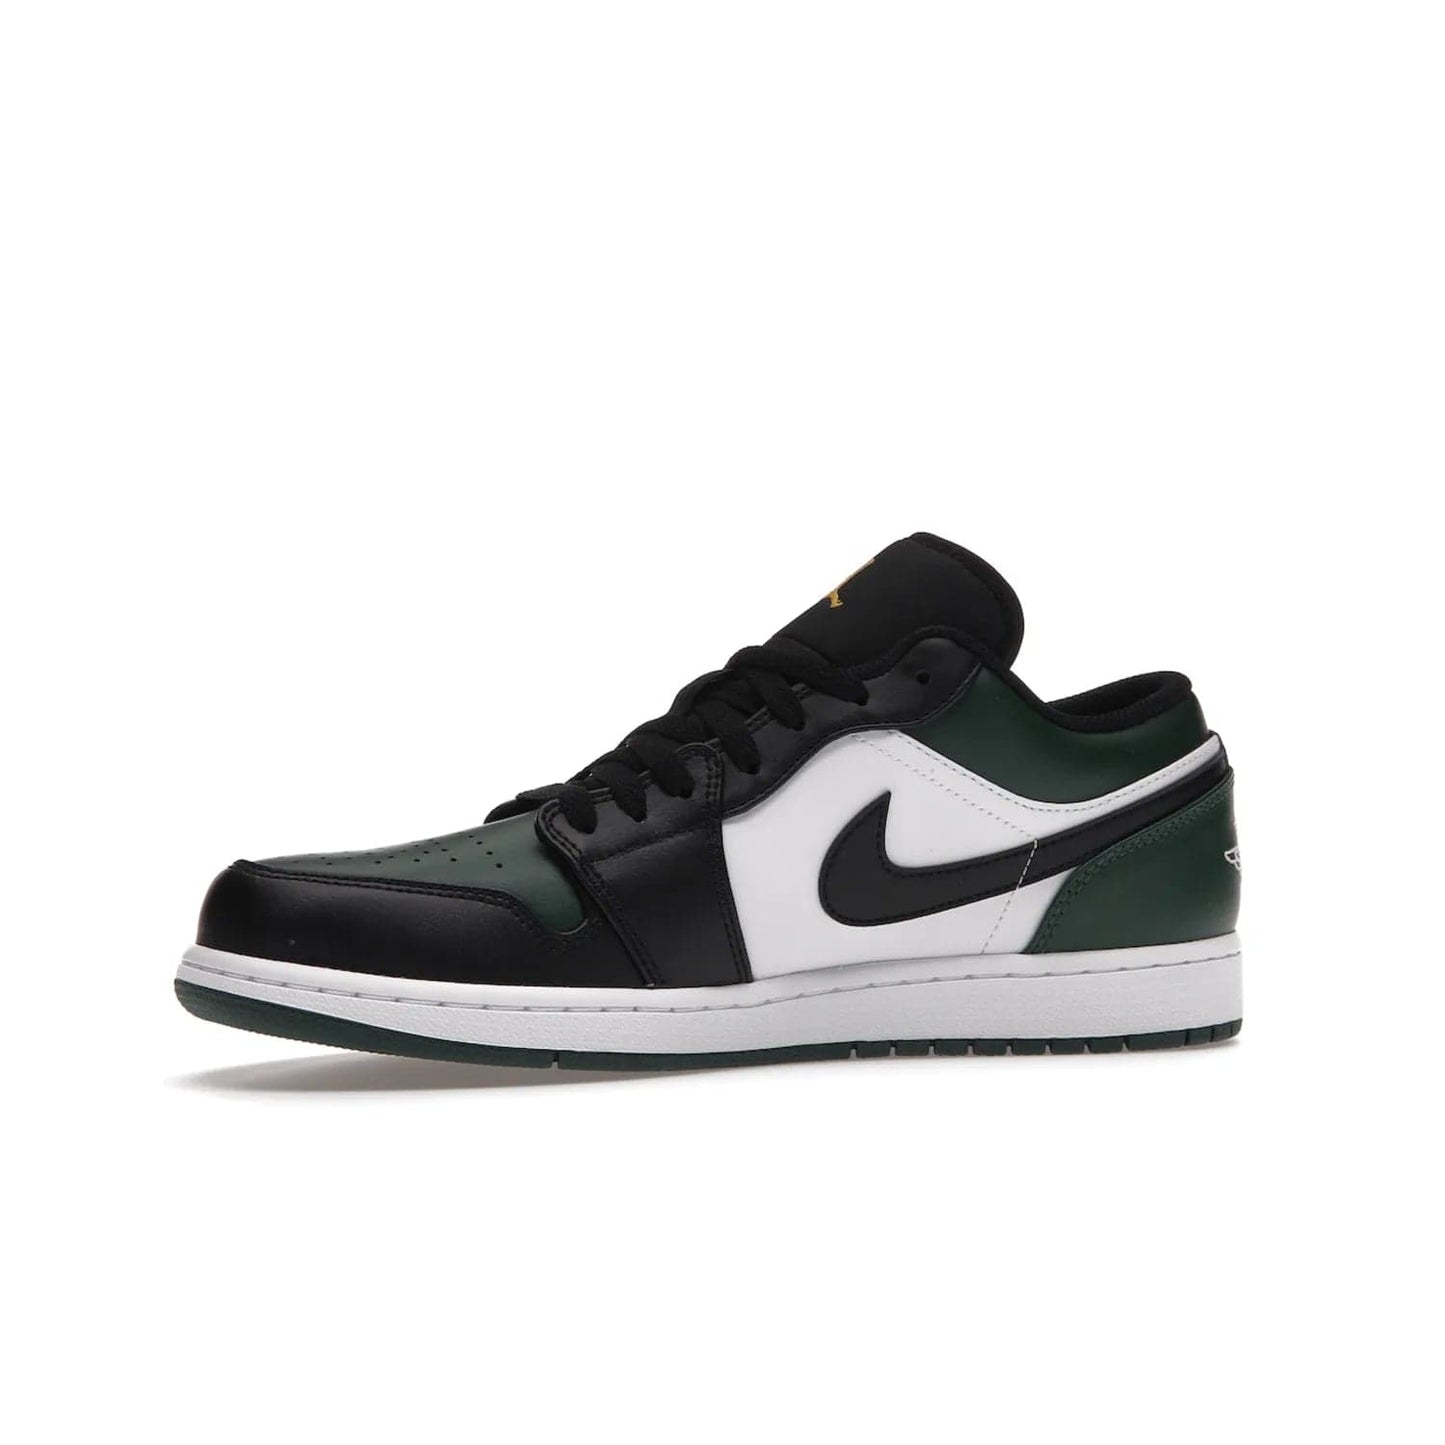 Jordan 1 Low Green Toe - Image 17 - Only at www.BallersClubKickz.com - The Jordan 1 Low Green Toe features white, black and Noble Green leather with black Swoosh. Get the classic Bred Toe-inspired color blocking with green perforated toe box. White and green Air sole completes the design. Released in October 2021 at only $100. Grab your pair now!